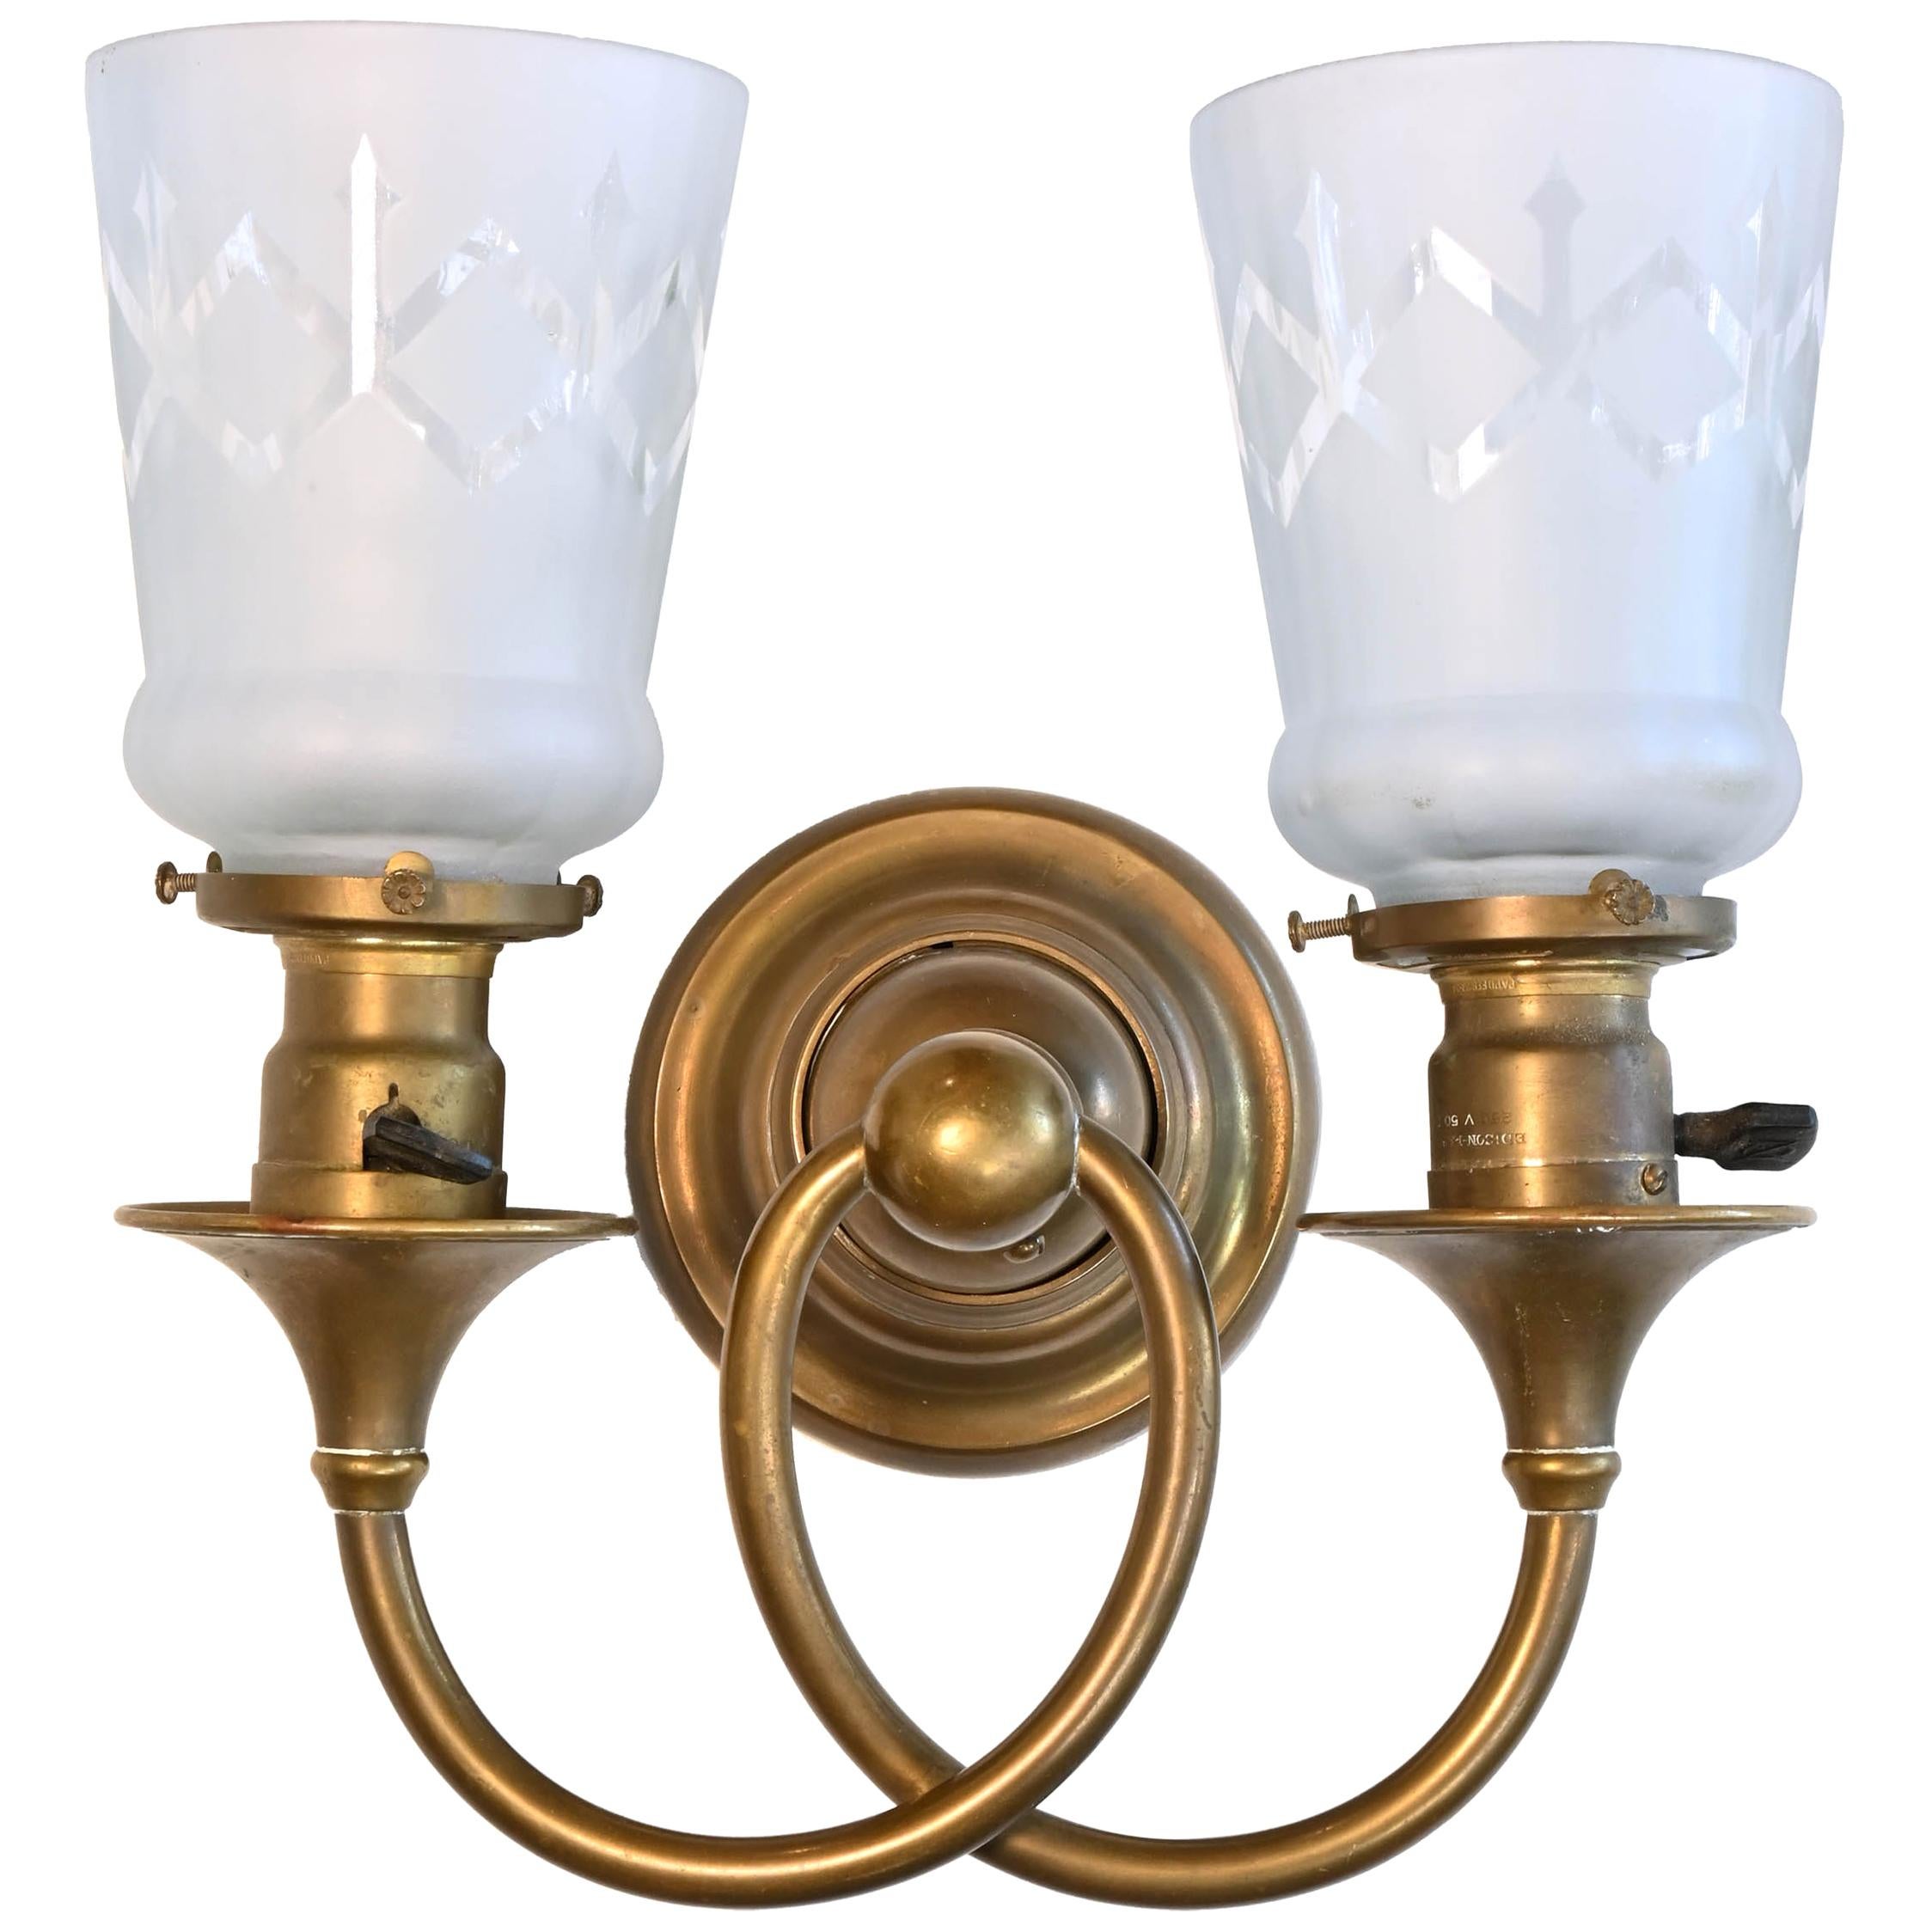 Early Bradley & Hubbard Sconce with Shades